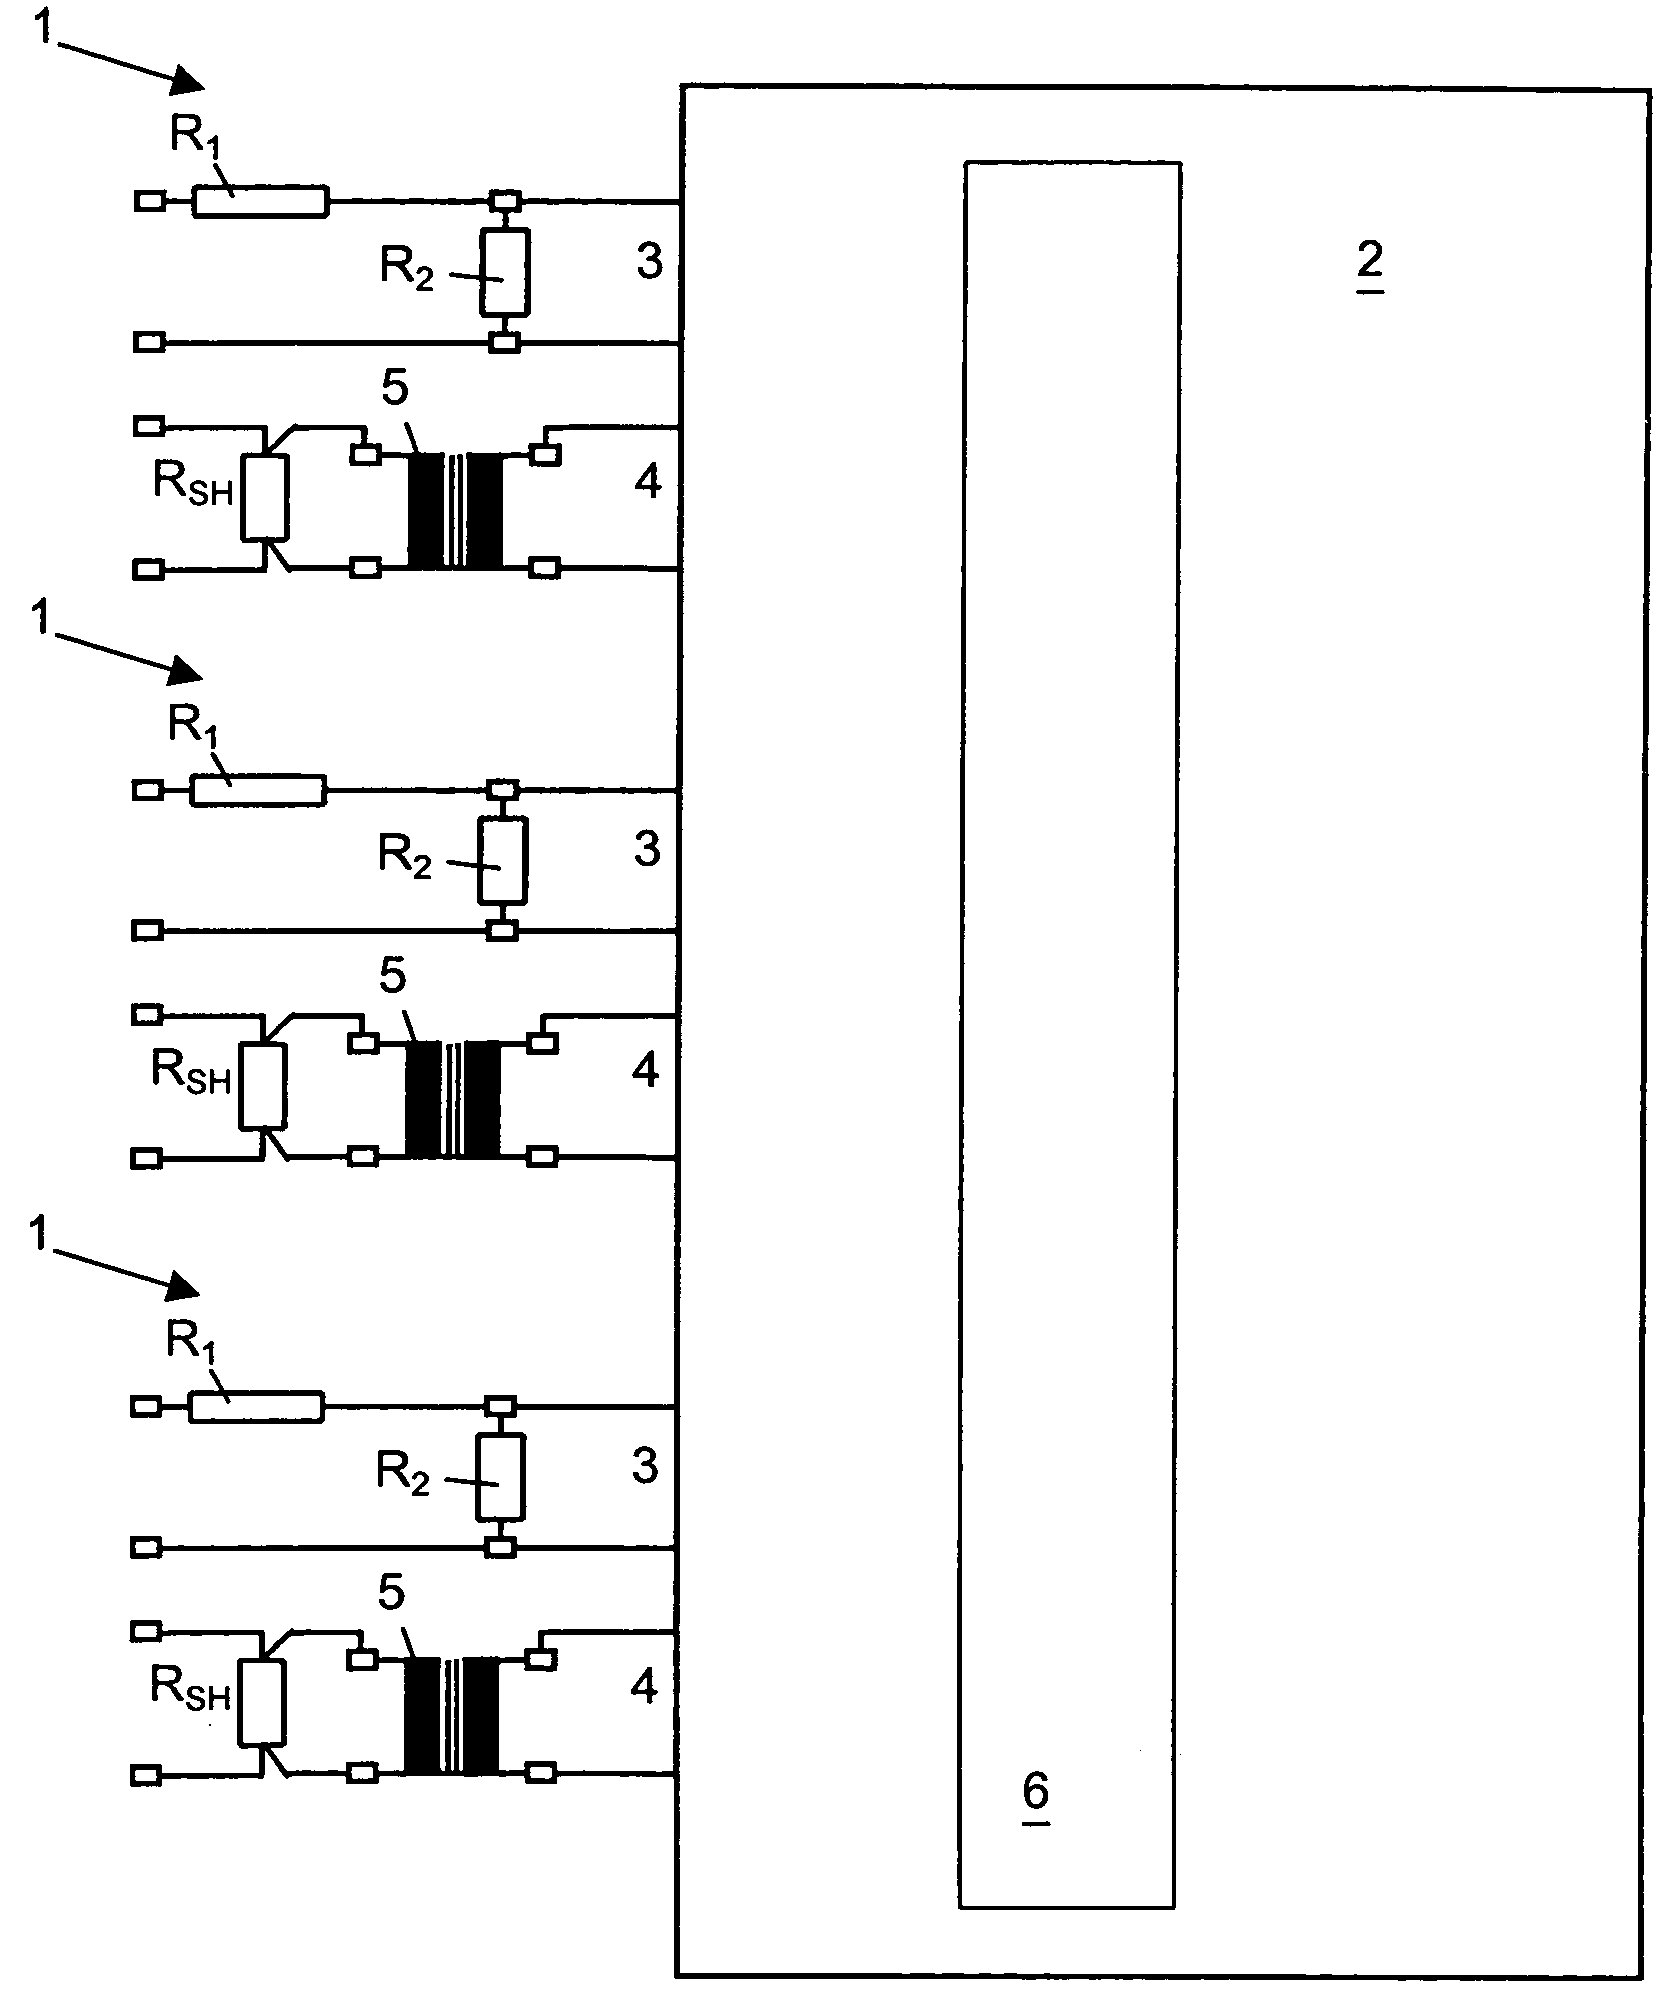 Measuring circuit arrangement for electricity meters for direct connection